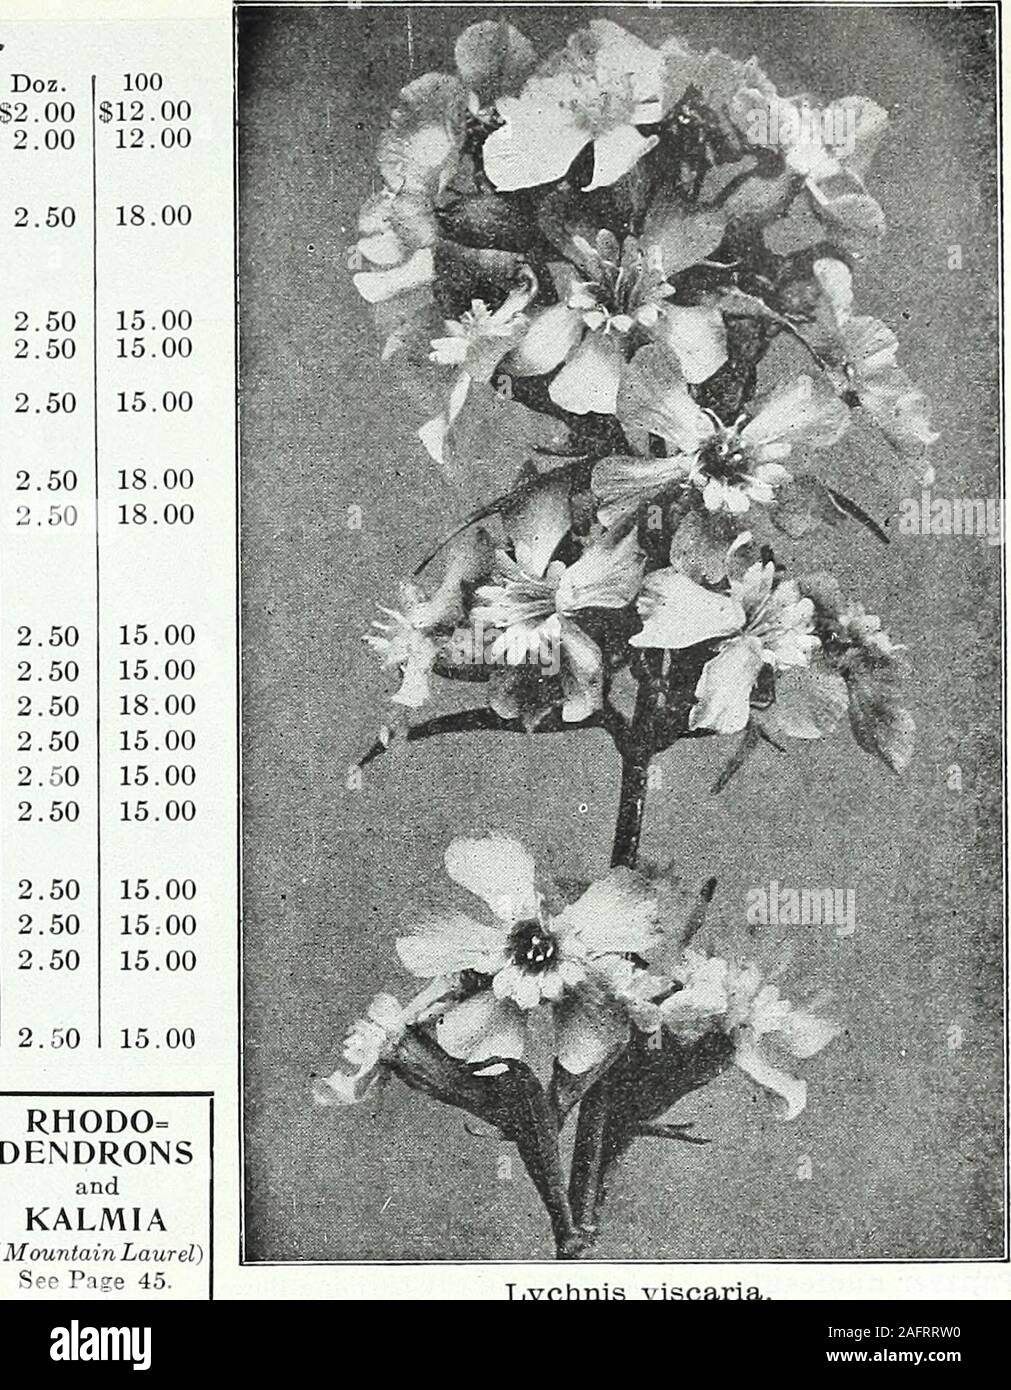 . Farquhar's autumn catalogue : 1921. 2.502.502.50 RHODO=DENDRONS and KALMIA (Mountain Laurel)See Page 45. Lychnis viscaria. Papaver orientale, Royal Scarlet. Liatris pycnostachya. ( Kansas Gay Feather.) Spikes oflight rosy-purple flowers; July and August. 4 ft.spicata. (Blazing Star.) Spikes of deep purple flowers; July to September. 2j ft. Linum perenne. (Flax.) A fine border or rockery plantwith delicate foliage and bright blue flowers; June to August. If ft perenne album. Pure white Lobelia cardinalis. (Cardinal Flower.) Splendid plantsfor borders or moist situations; flowers cardinal-red; Stock Photo